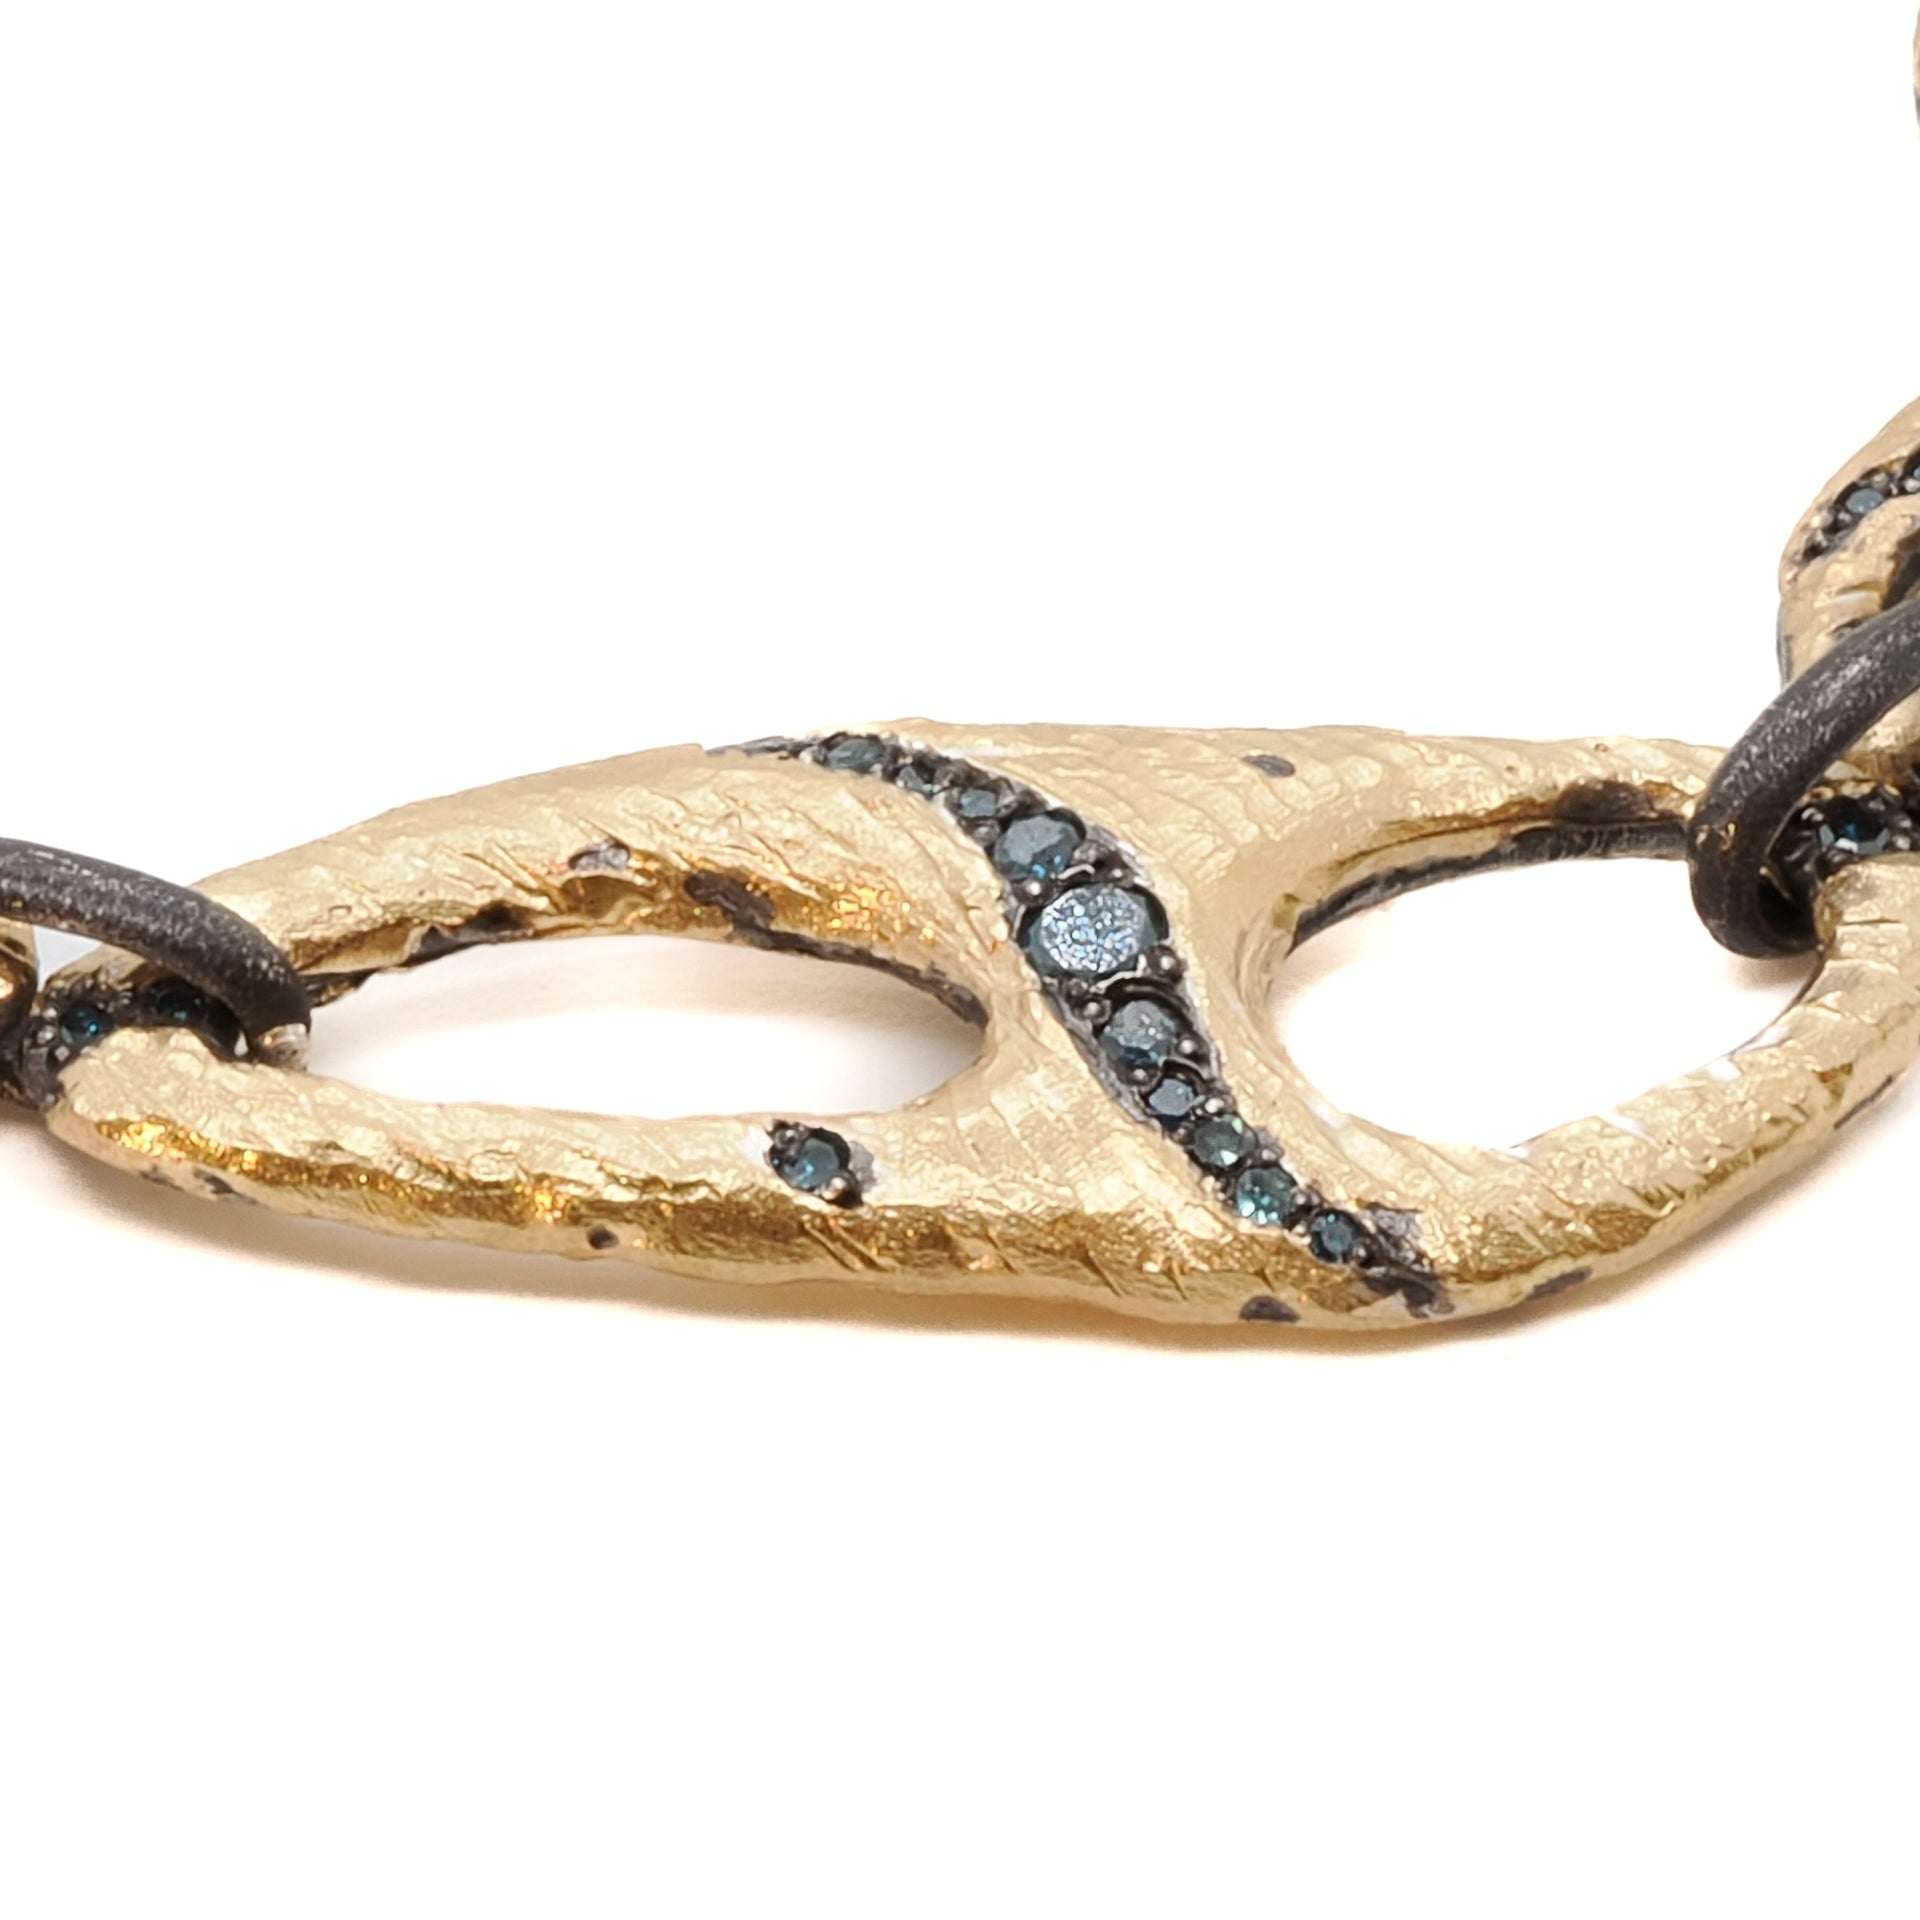 Recycled Handmade Jewelry - Nature Uneven Bracelet, an eco-friendly statement piece.